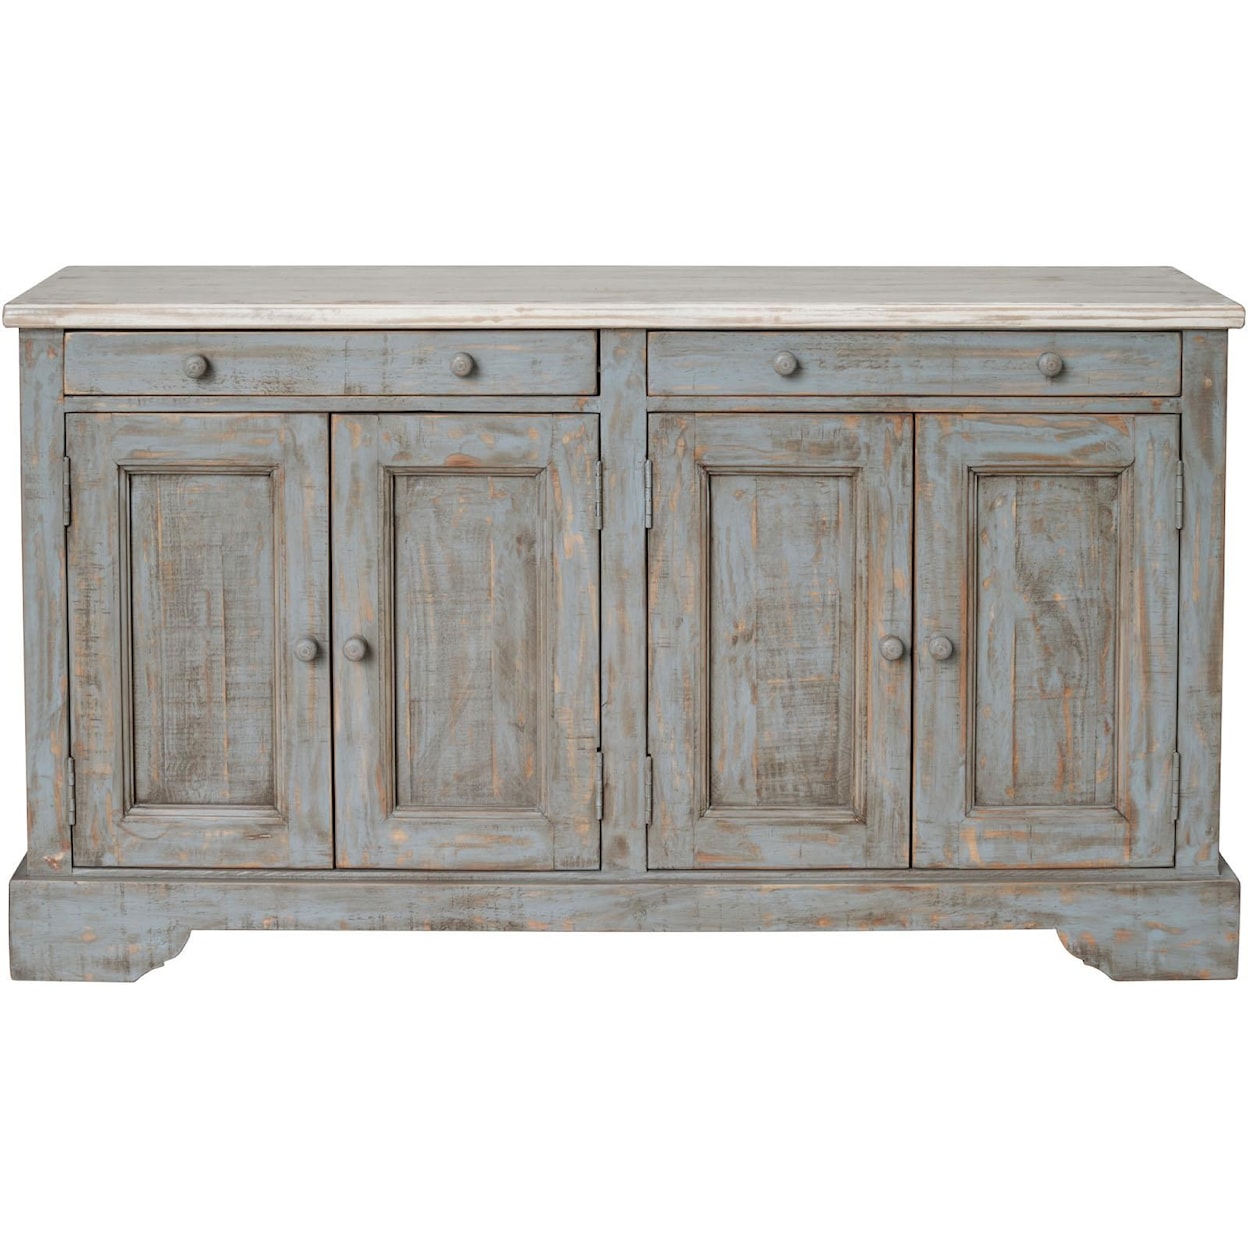 Furniture Source International Occasional Tables Ashley 4 Door Console